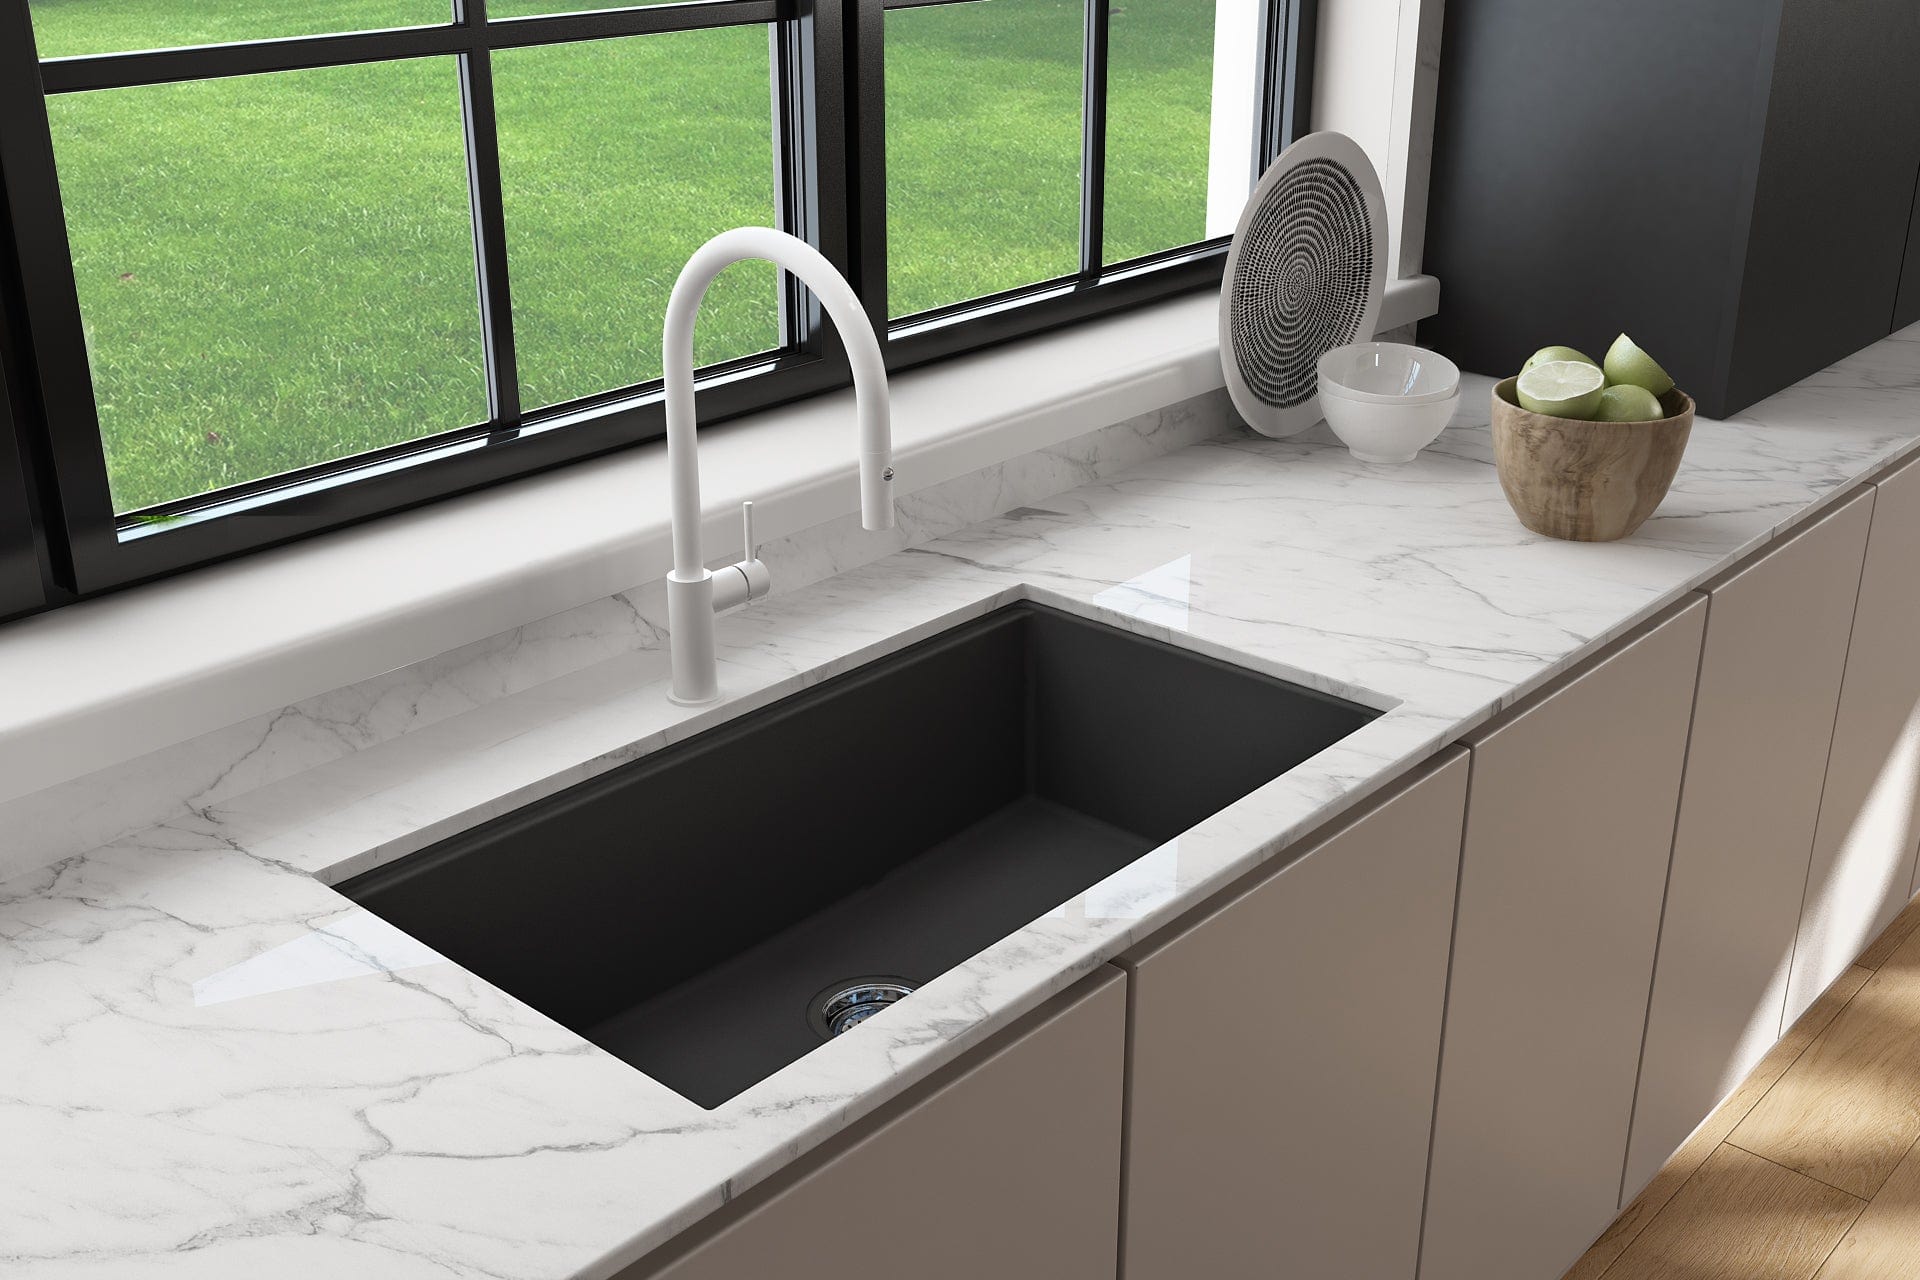 BOCCHI BAVENO LUX 34" Dual-Mount Single Bowl Granite Composite Kitchen Sink with Integrated Workstation and Accessories with Covers